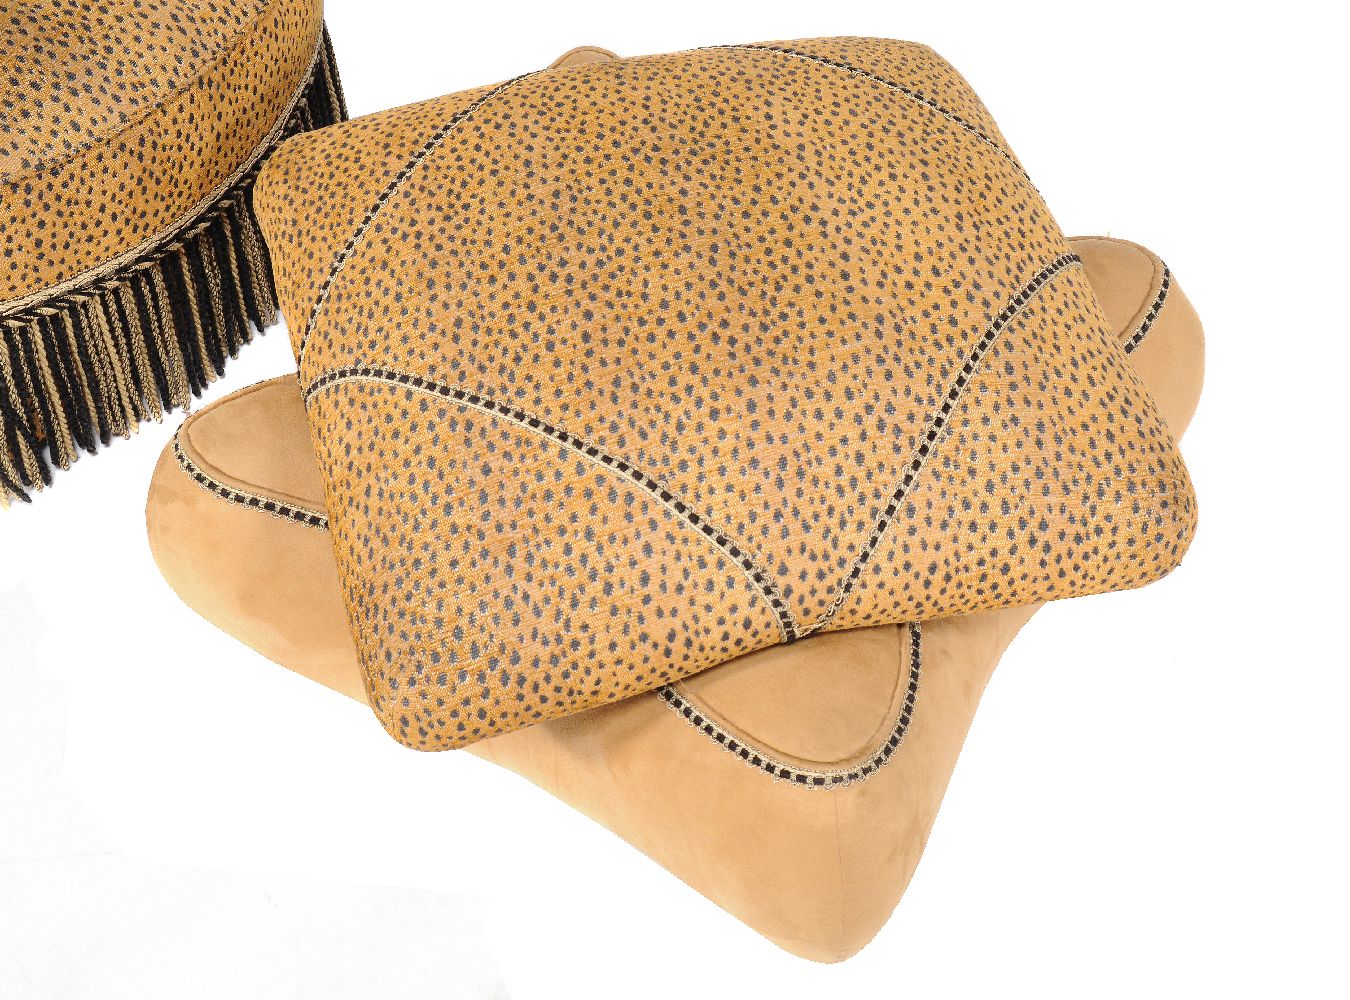 A faux leopard skin upholstered armchair in Art Deco style - Image 2 of 2